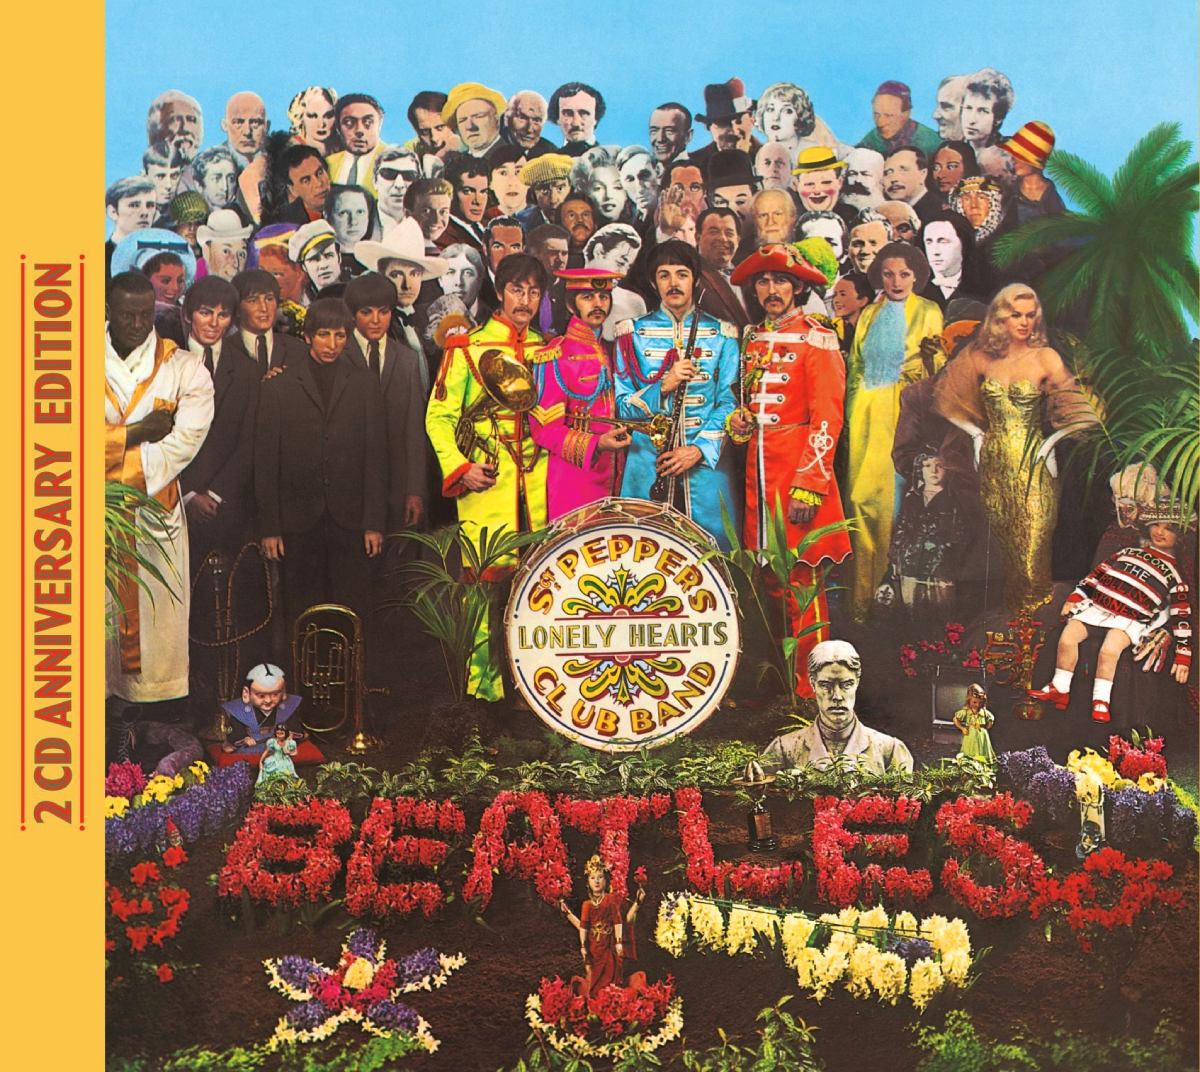 Sgt. Pepper 's Lonely Hearts Club Band (Beatles album)